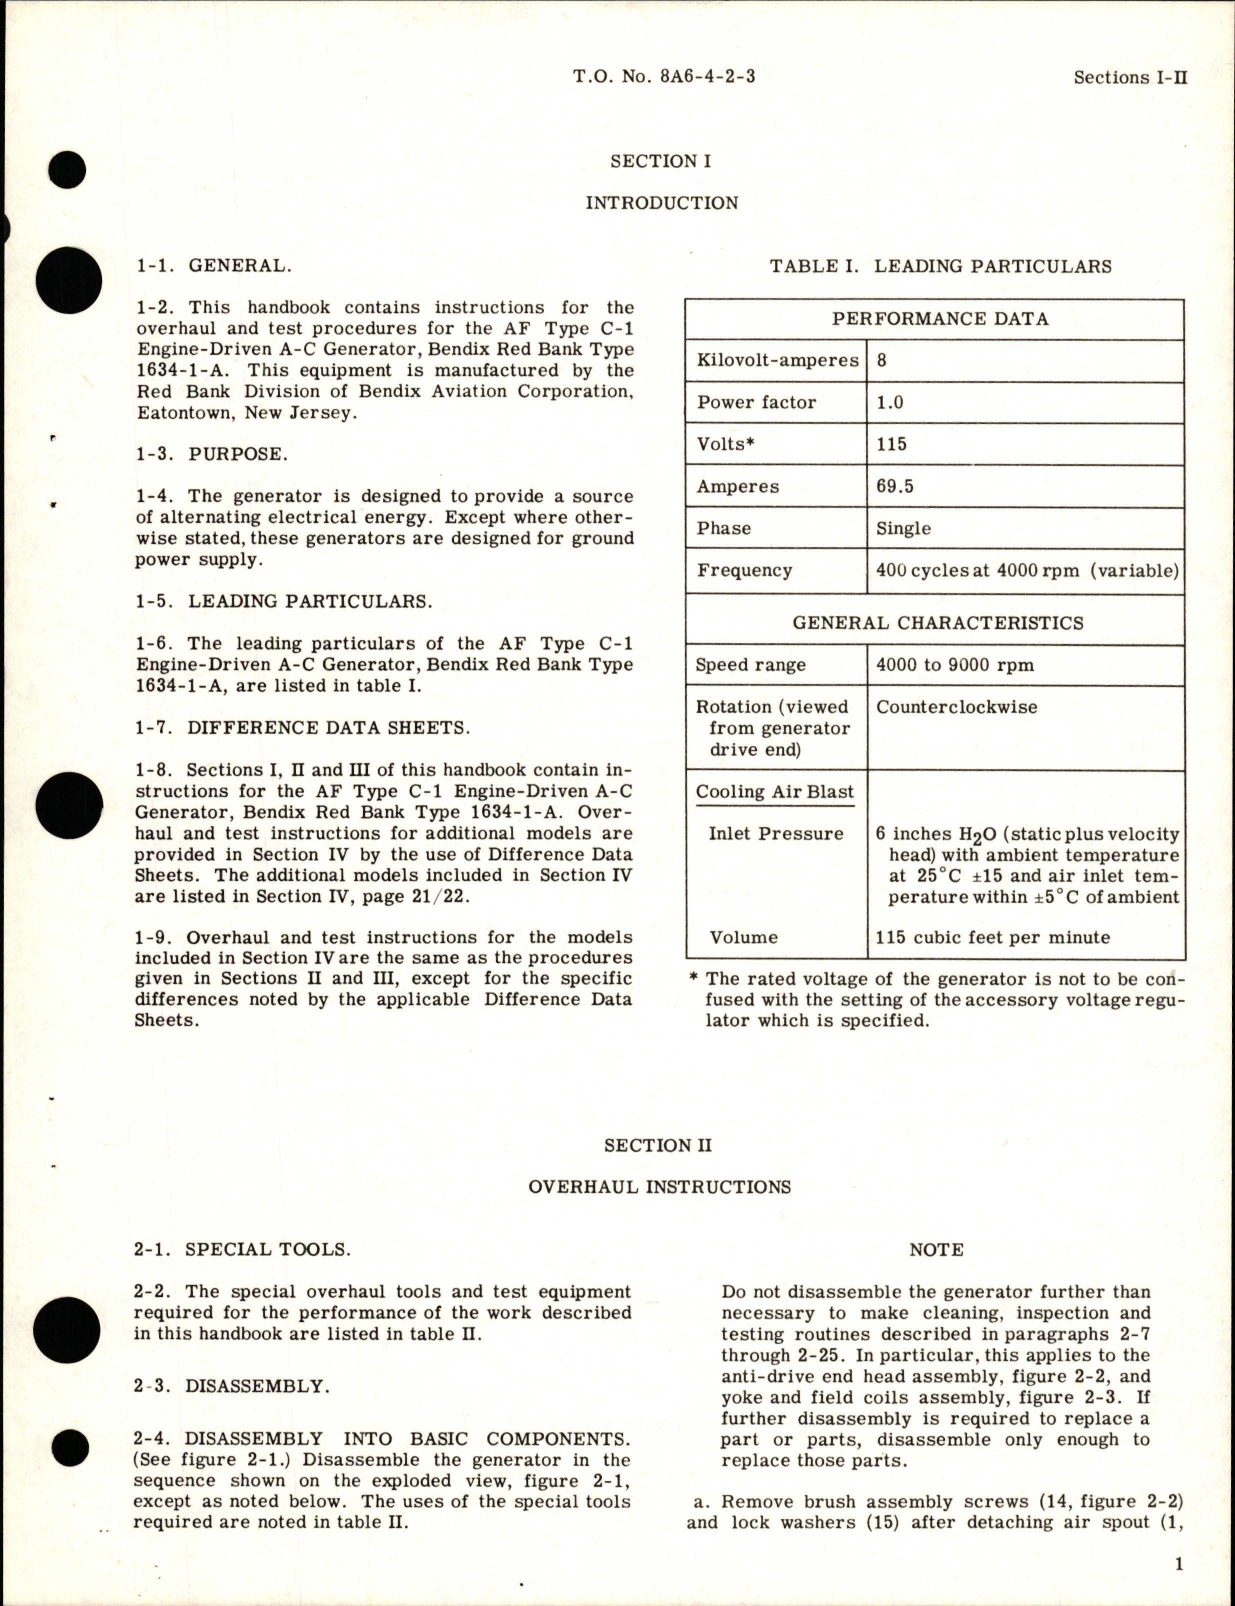 Sample page 5 from AirCorps Library document: Overhaul Instructions for Engine Driven A-C Generators